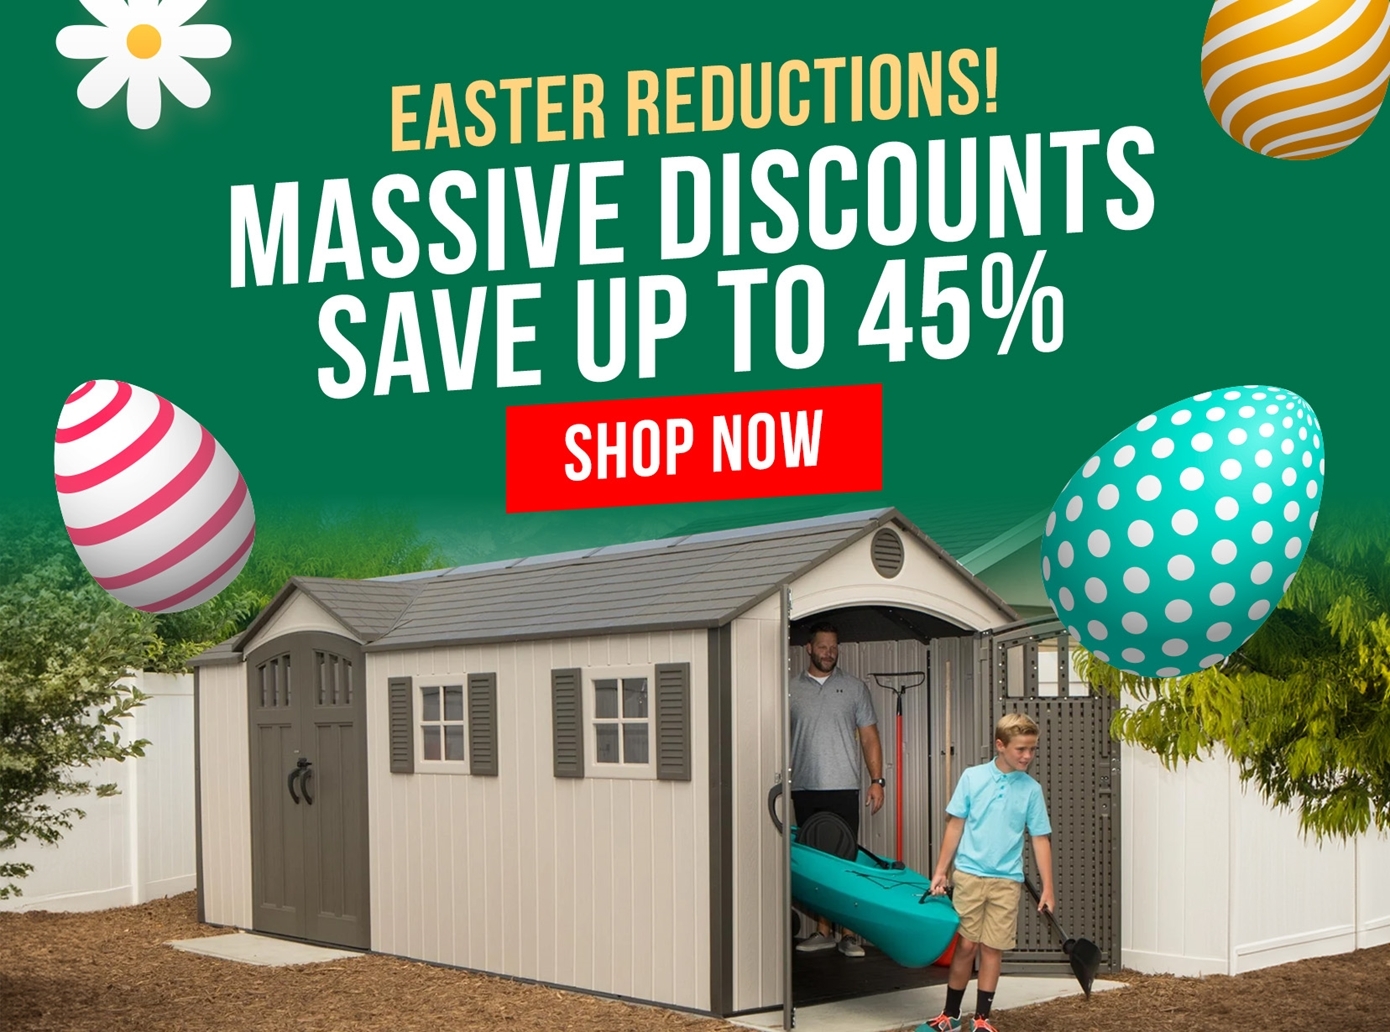 easter reductions save up to 45%